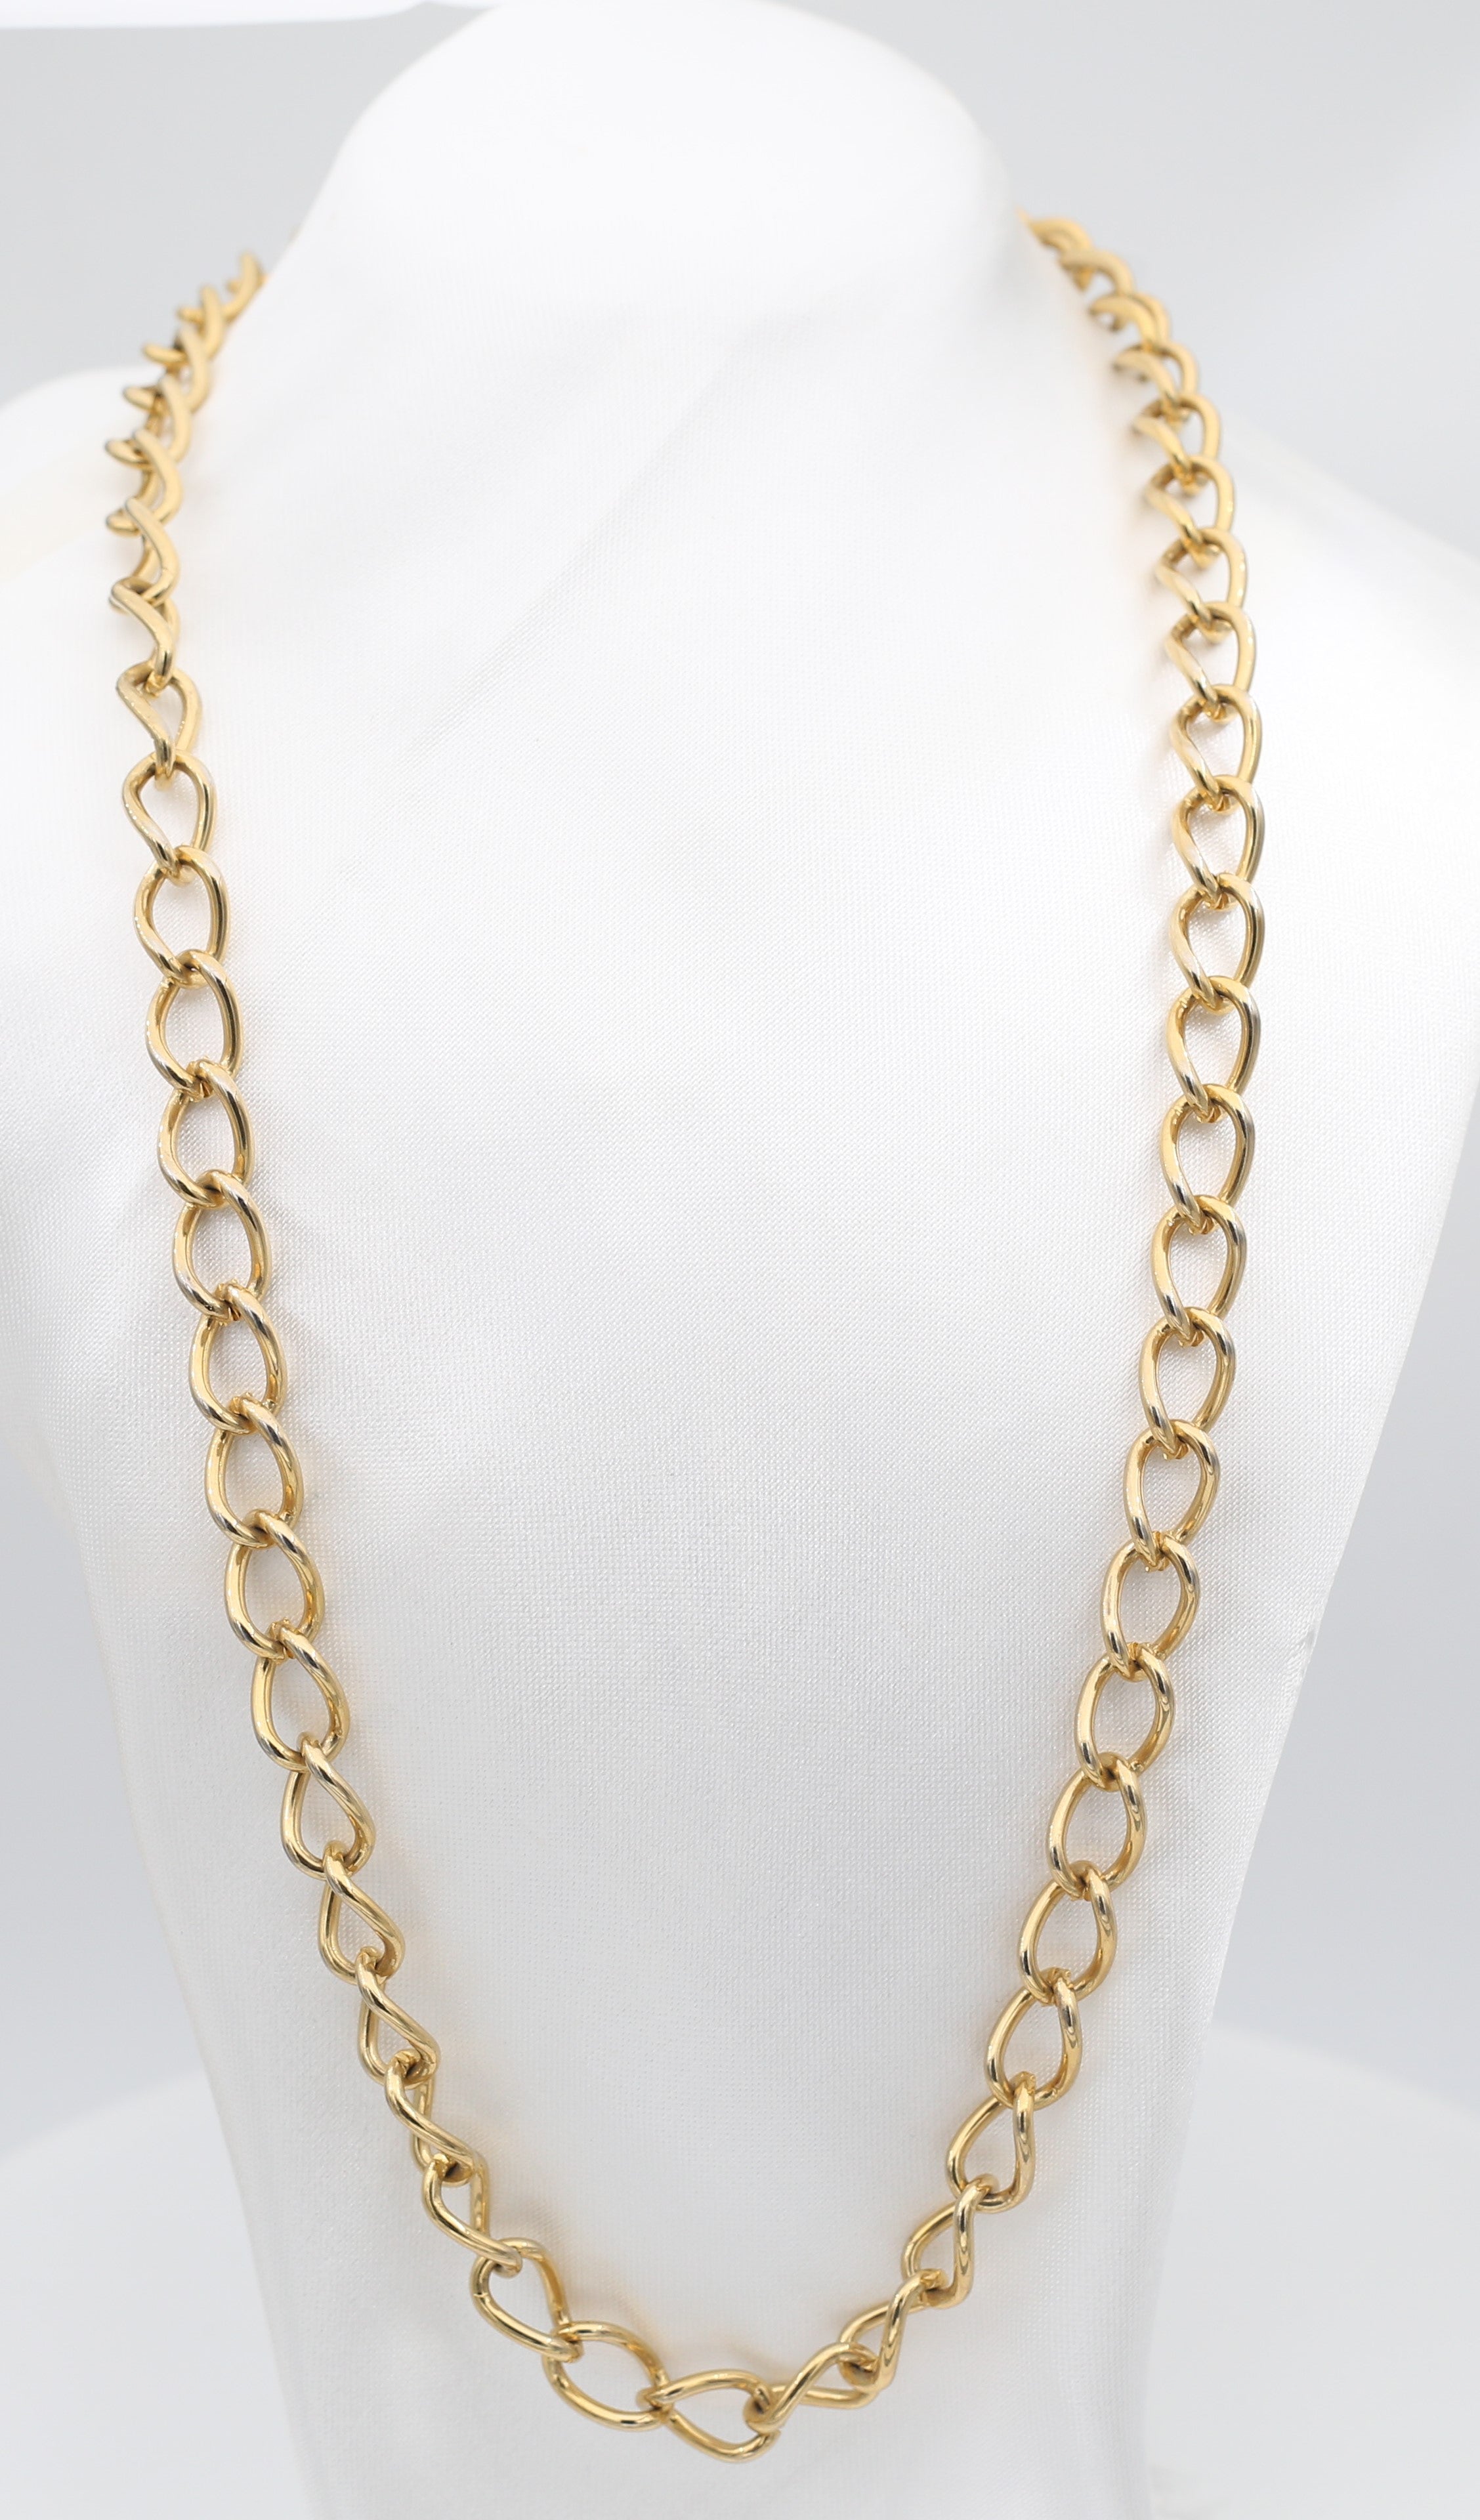 Gold Tone Chain Necklace